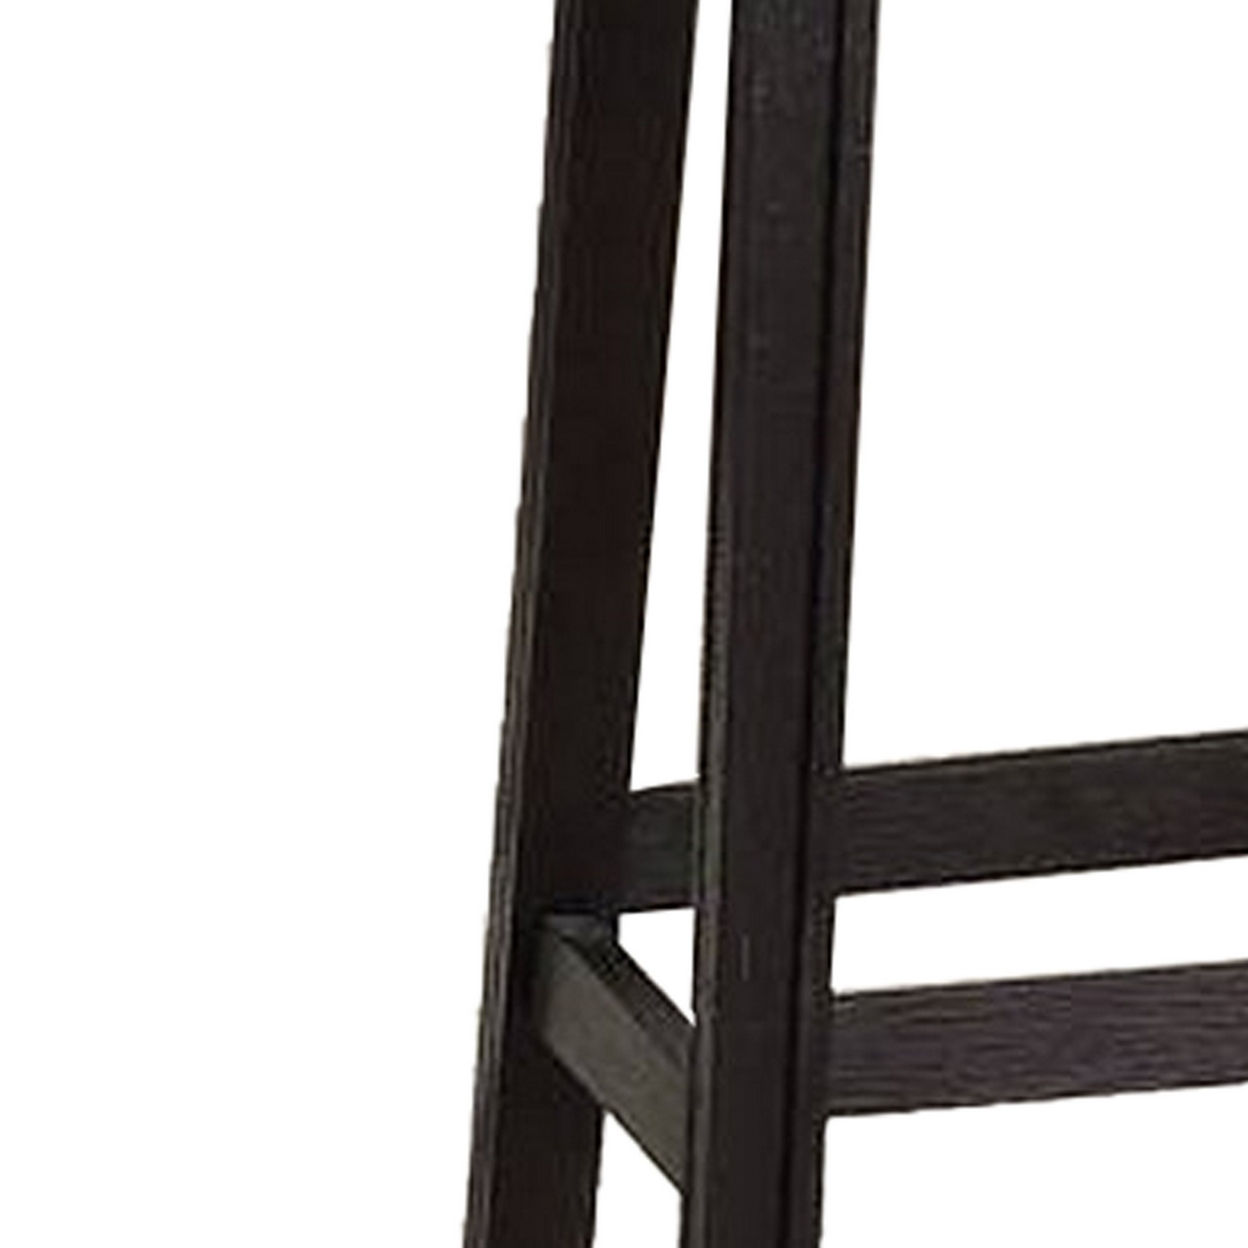 29 Inch Wooden Bar Stool With Upholstered Cushion Seat, Gray And Black- Saltoro Sherpi